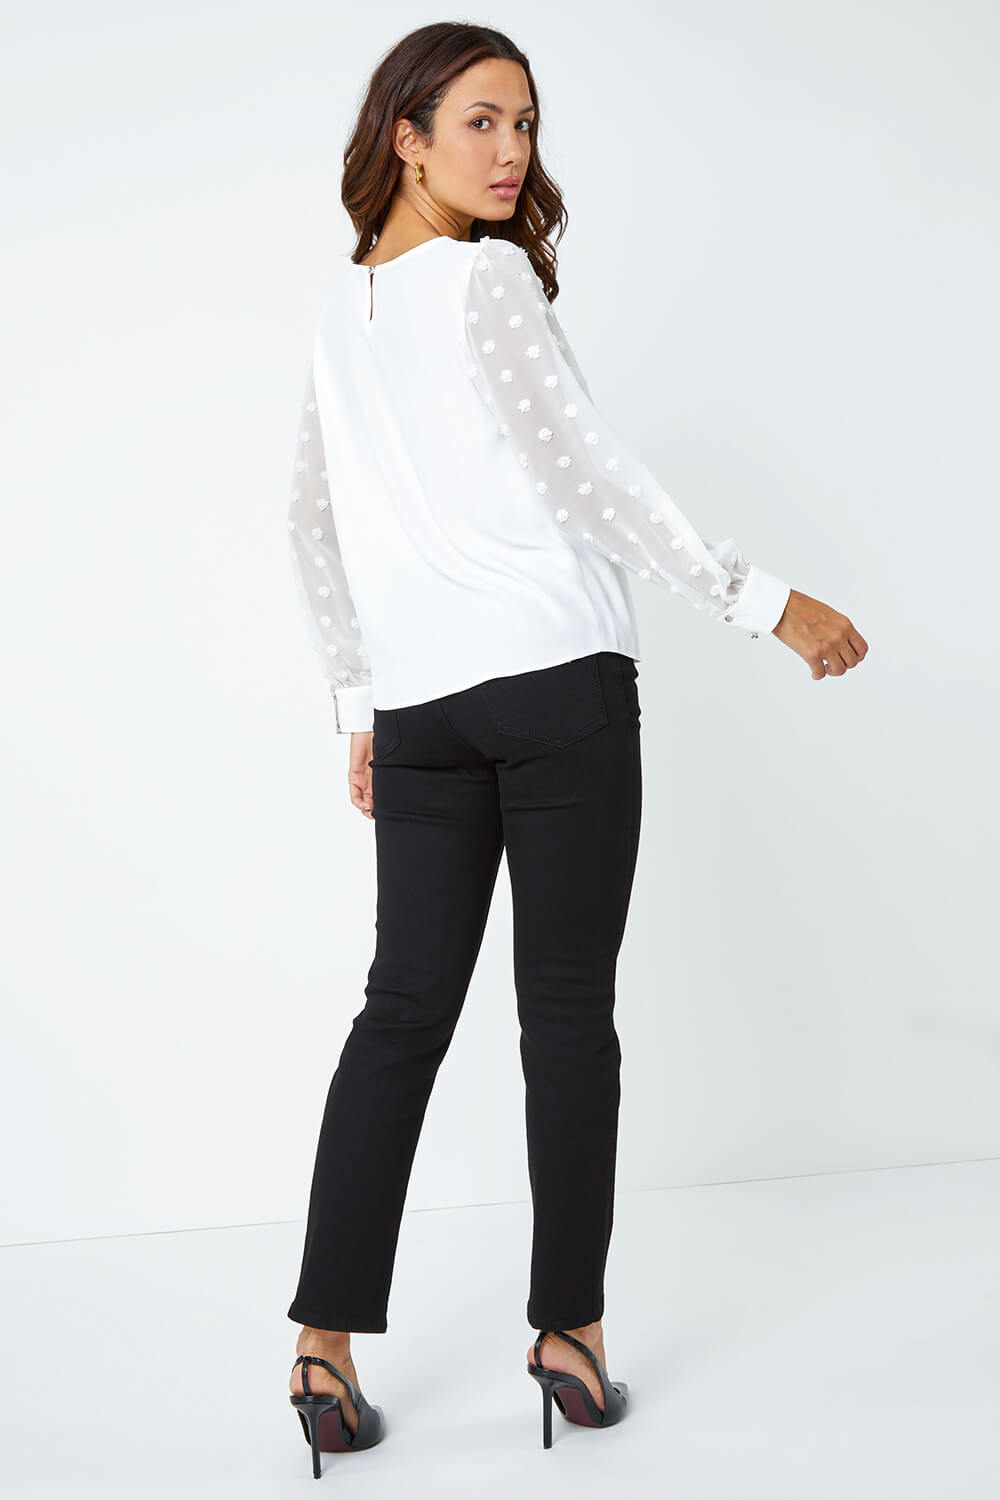 Ivory  Textured Spot Sleeve Top, Image 3 of 5